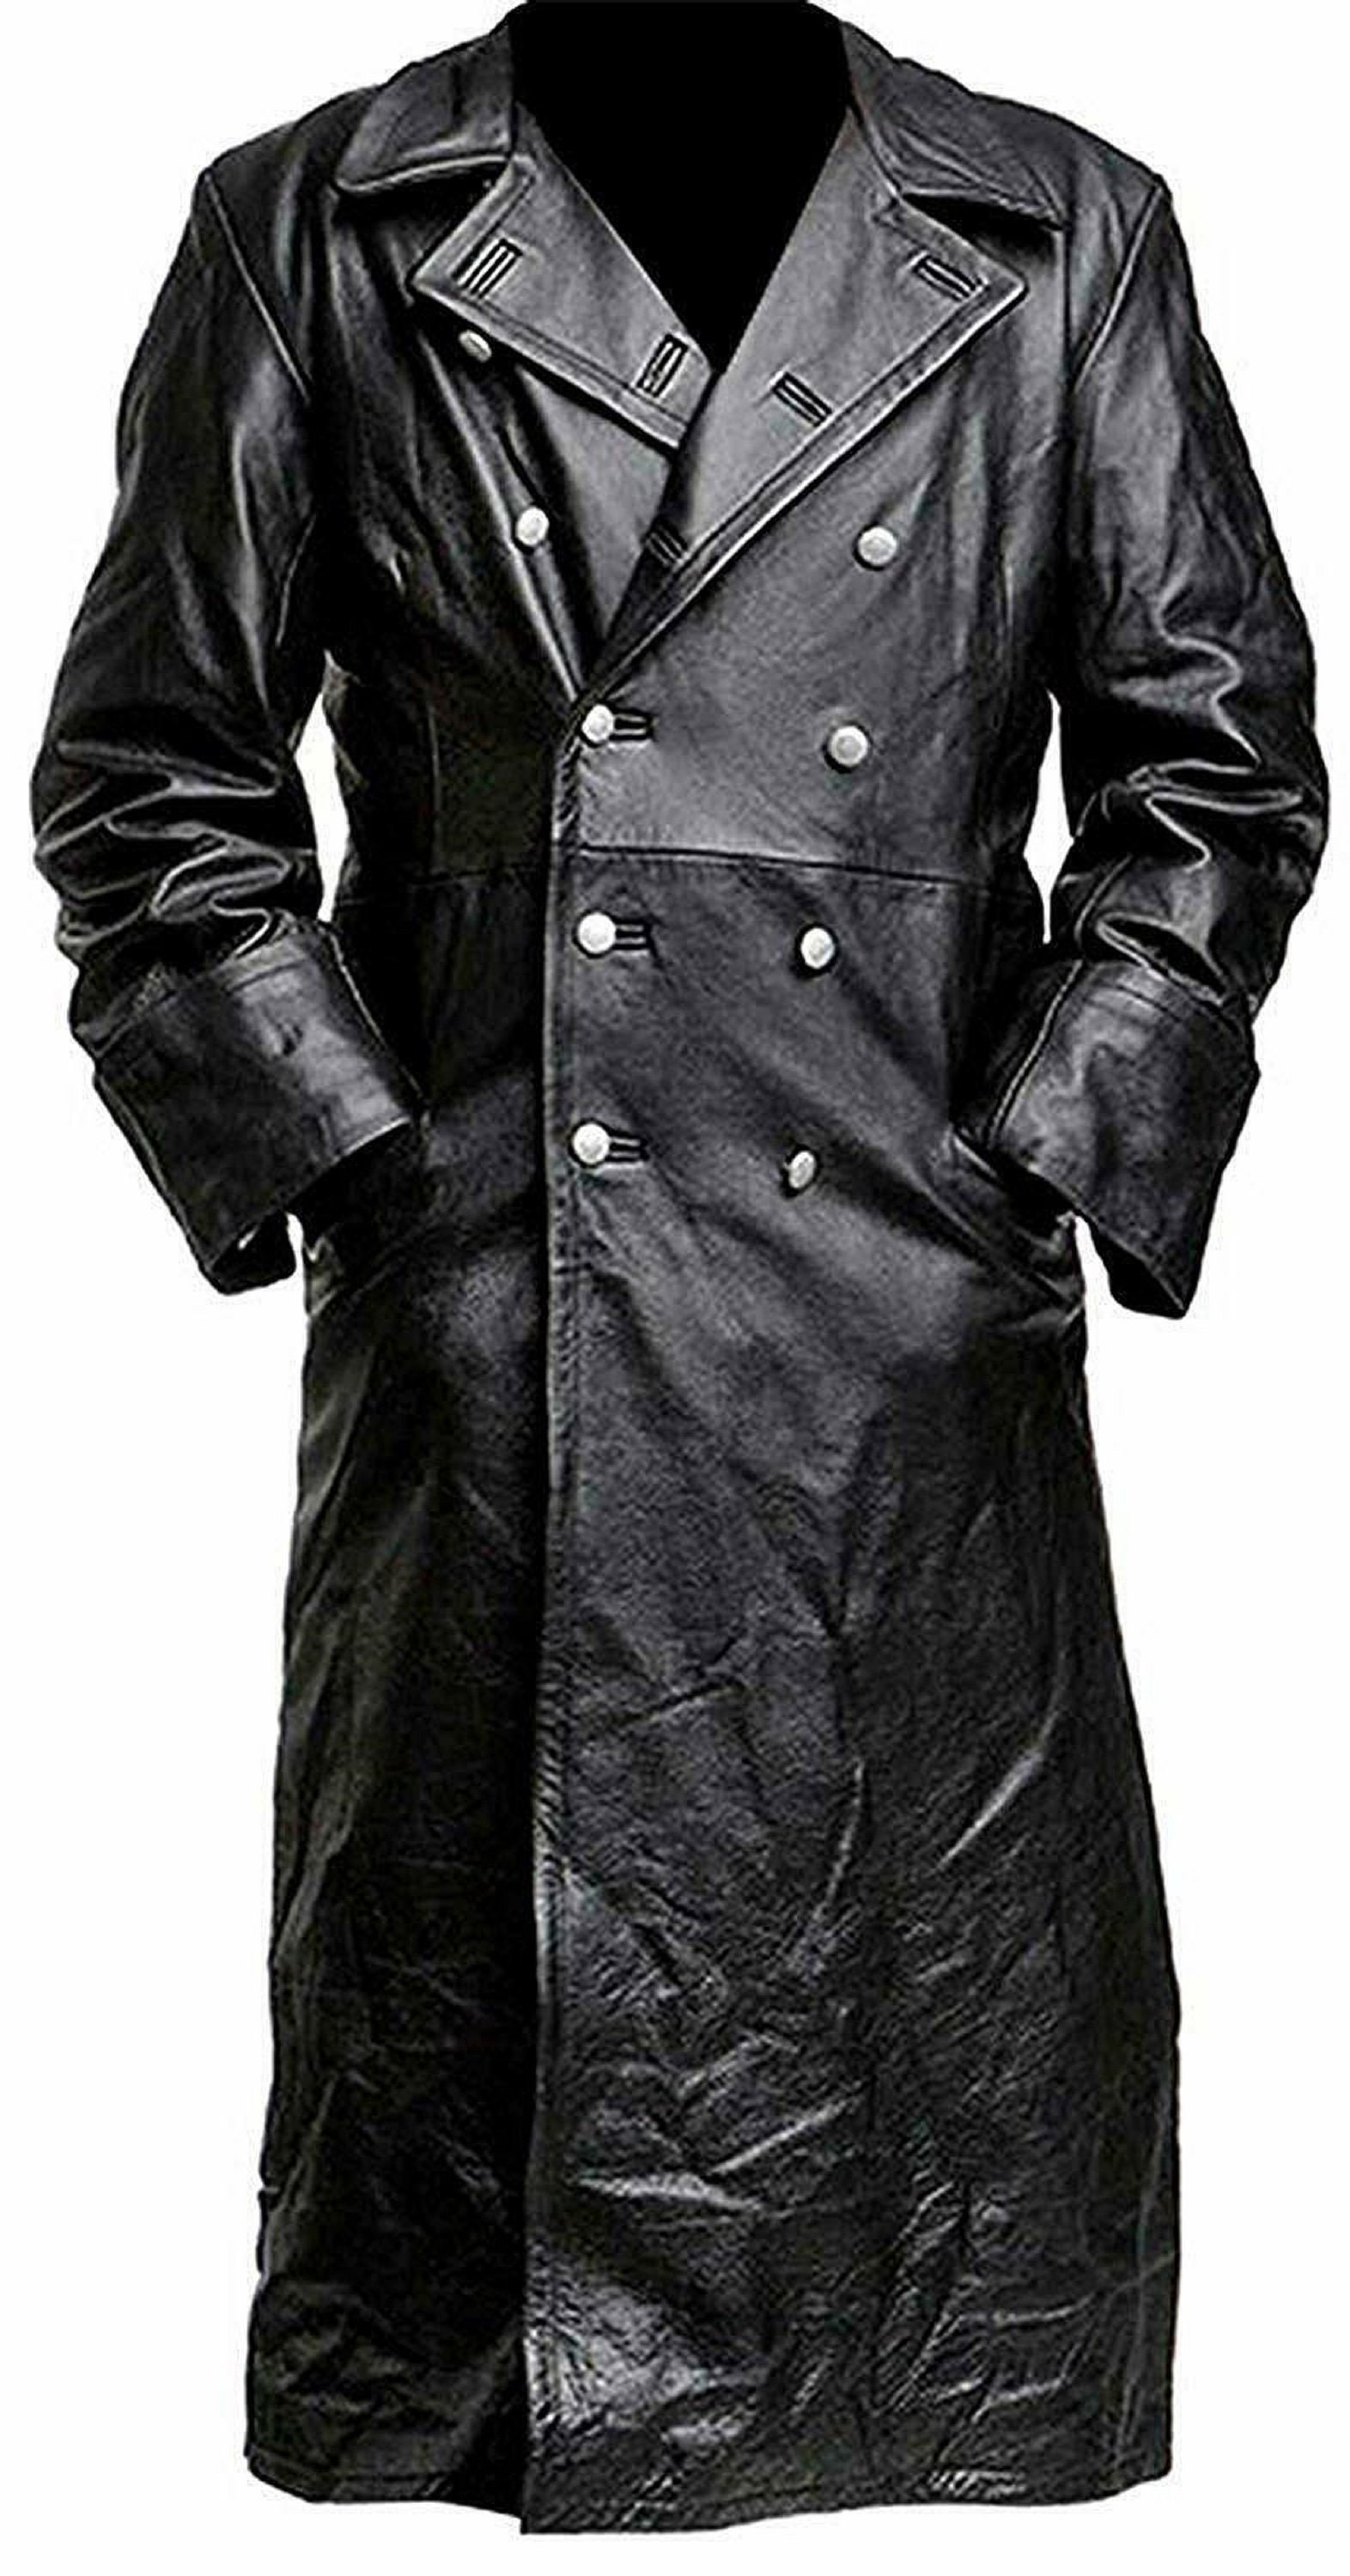 Mens Vintage German Military Real Leather Jacket Trench Coat - Etsy